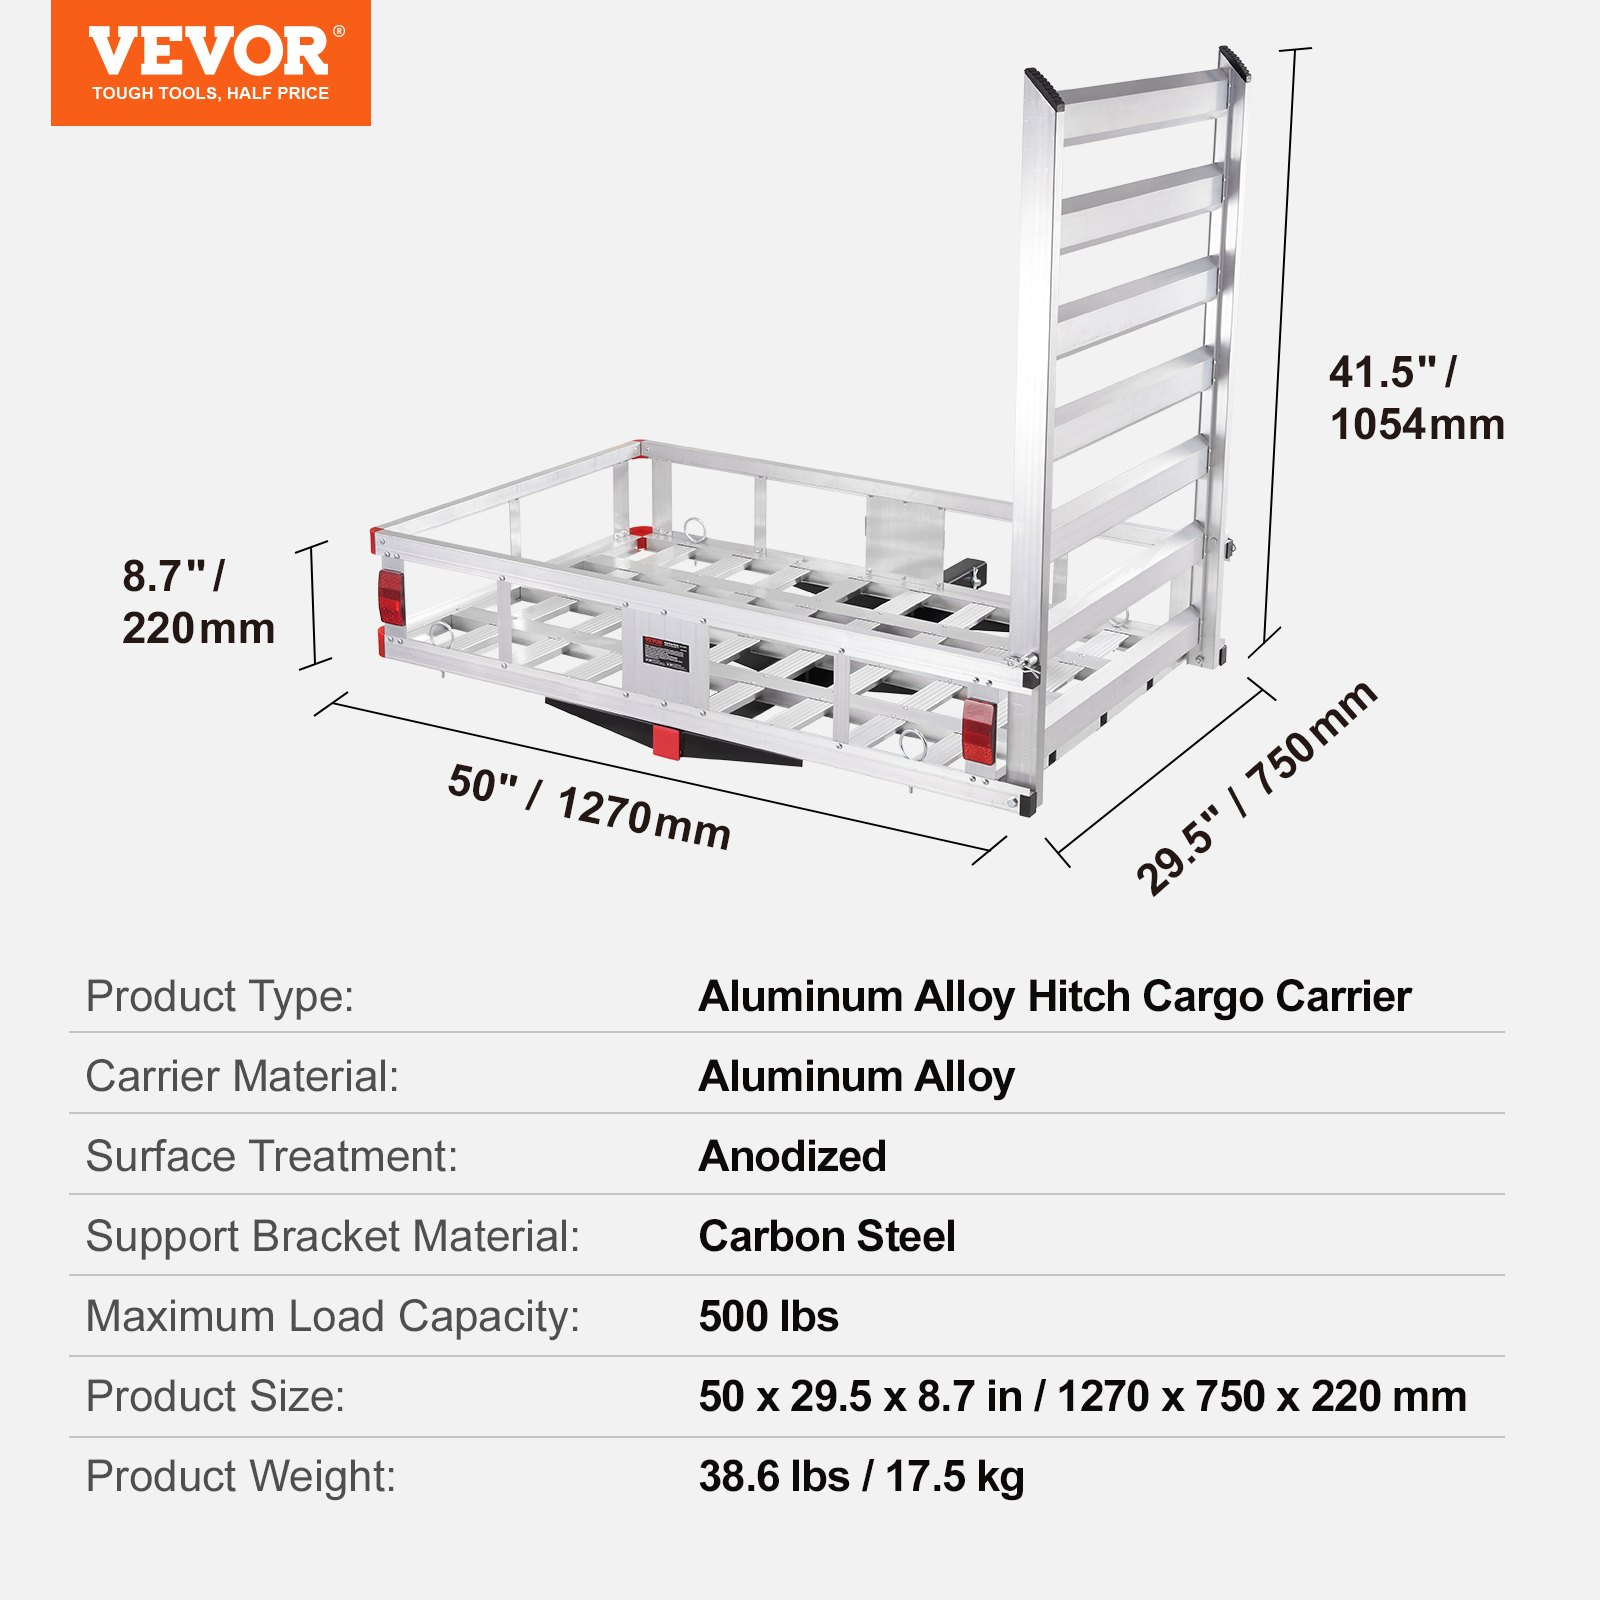 VEVOR 50 x 29.5 x 8.7 inch Hitch Cargo Carrier, 500lbs Capacity Trailer Hitch Mounted Cargo Basket, Aluminum Luggage Carrier Rack with Folding Ramp, Fits 2" Hitch Receiver for SUV Truck Pickup Camping, Goodies N Stuff